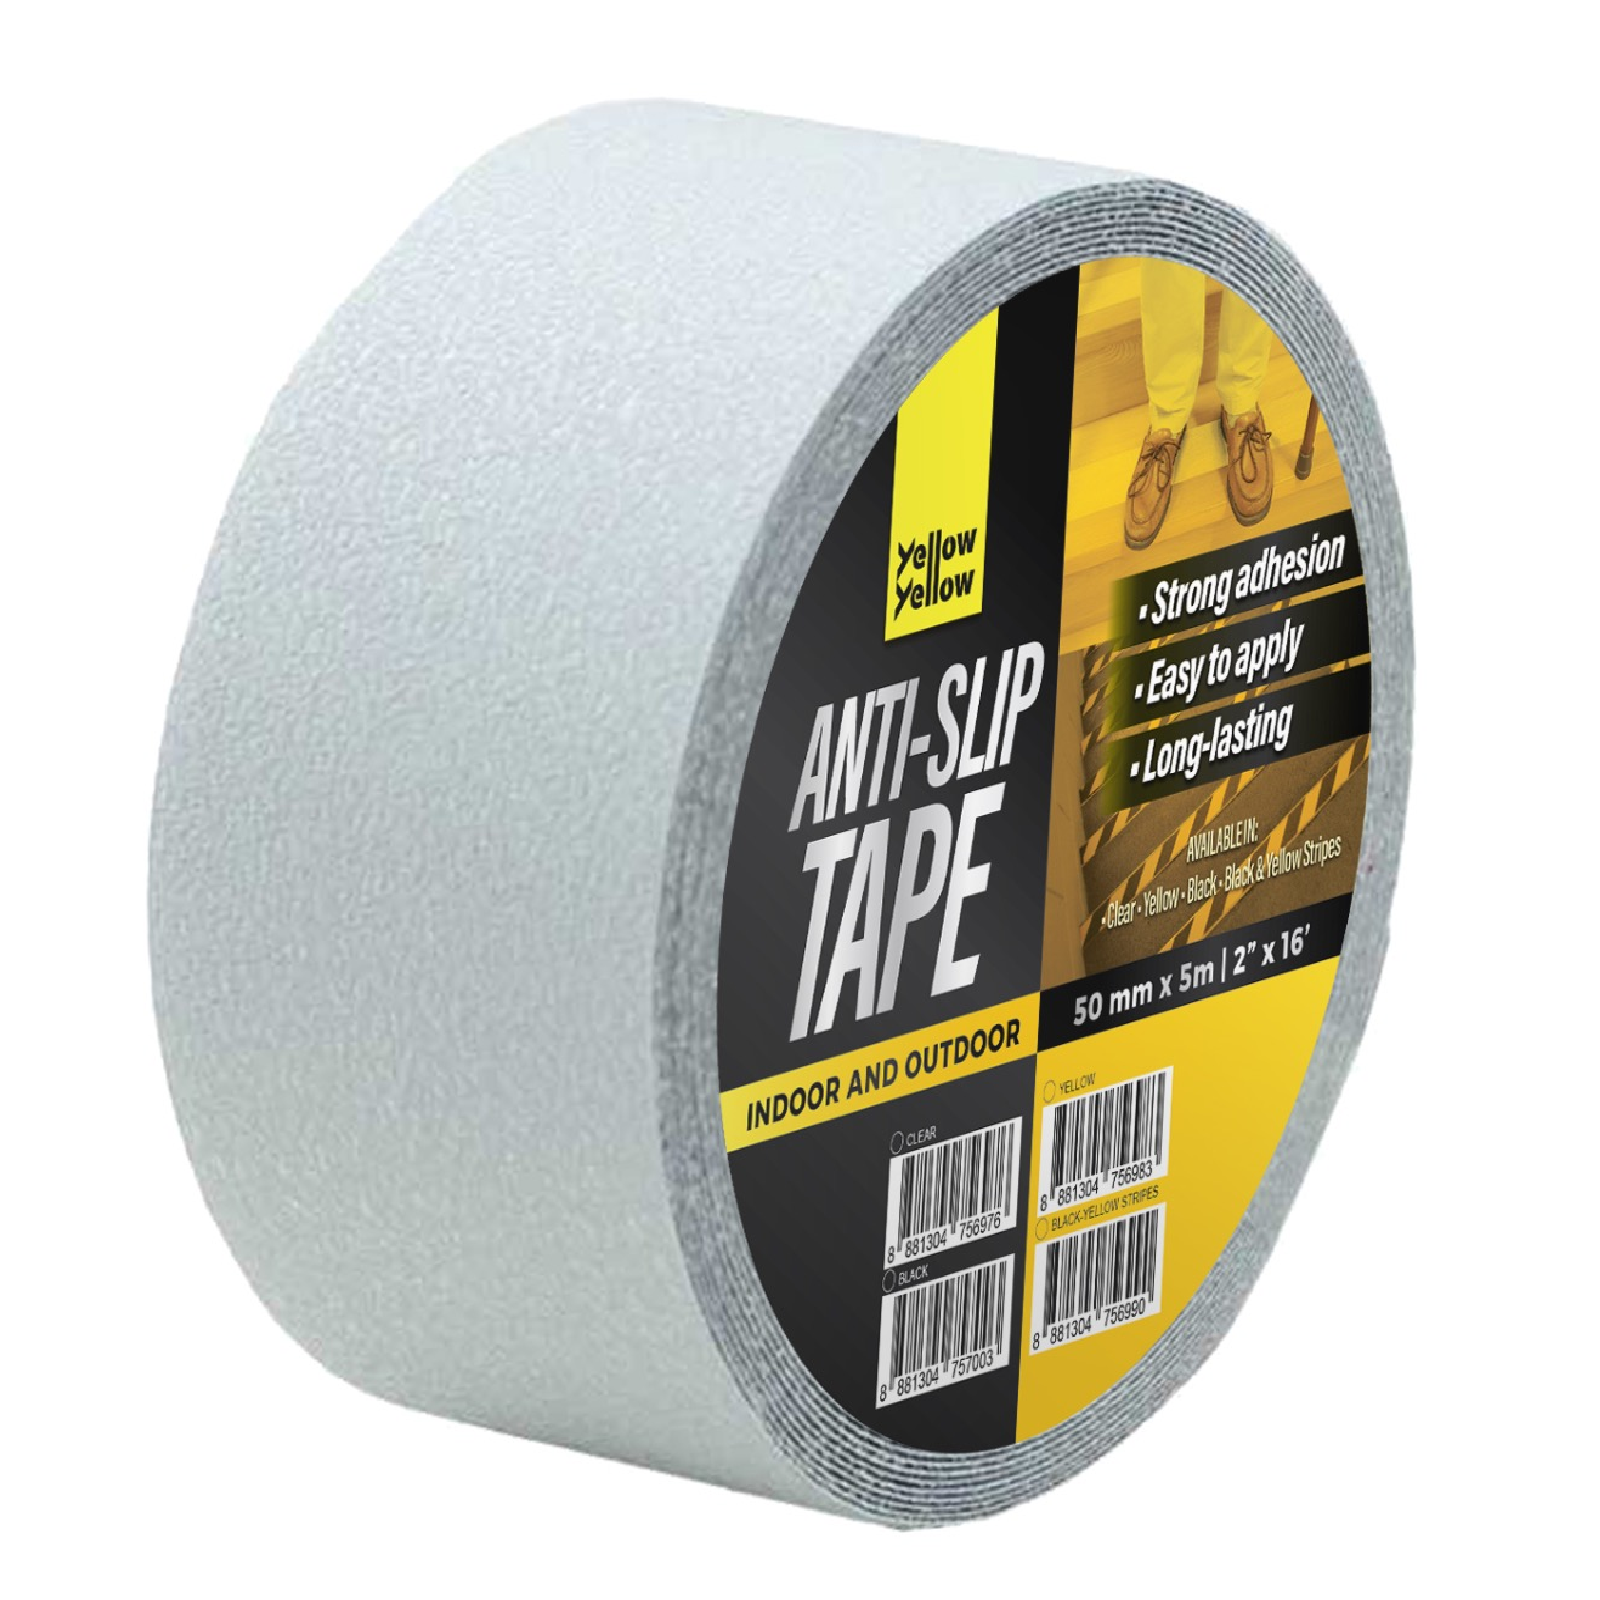 Yellowyellow ANTI-SLIP TAPE 2"/50MM X 5M (16FT) CLEAR INDOOR & OUTDOOR